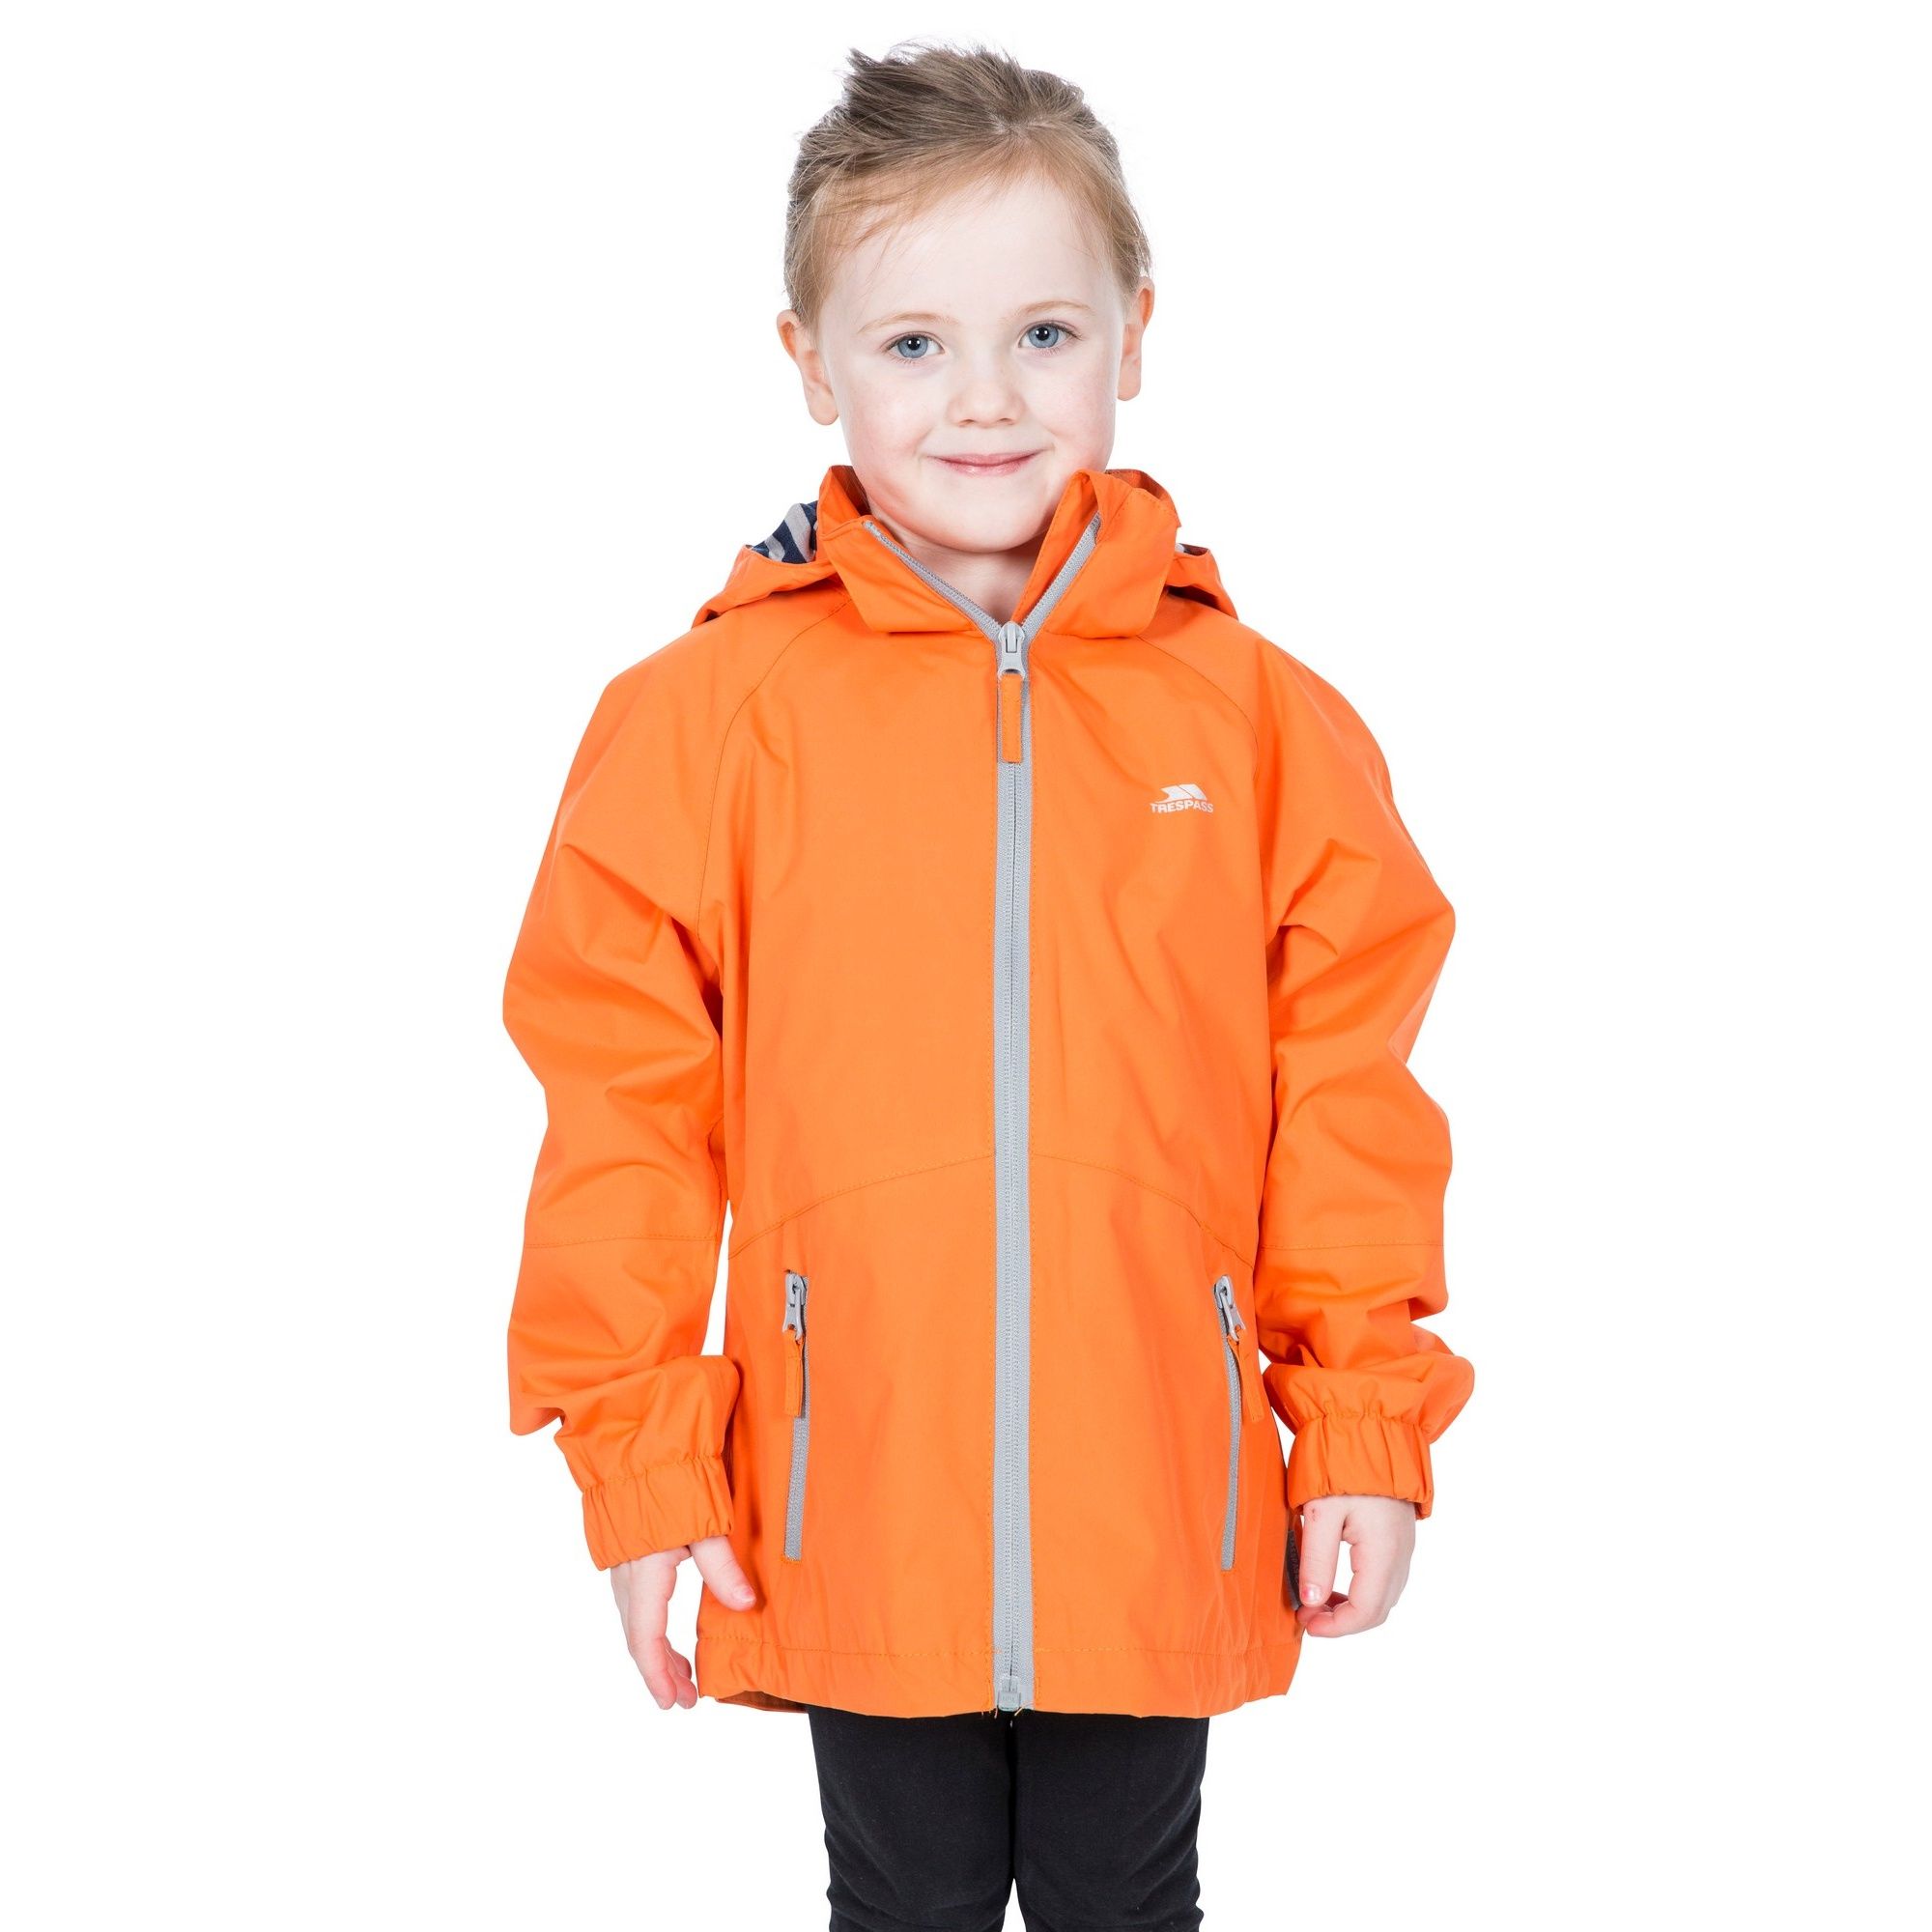 Striped inner lining. Detachable/stud off hood. 2 zip pockets. Elasticated cuffs. Waterproof 3000mm, windproof, taped seams. Shell: 100% Polyester, PVC coating, Lining: 100% Polyester. Trespass Childrens Chest Sizing (approx): 2/3 Years - 21in/53cm, 3/4 Years - 22in/56cm, 5/6 Years - 24in/61cm, 7/8 Years - 26in/66cm, 9/10 Years - 28in/71cm, 11/12 Years - 31in/79cm.